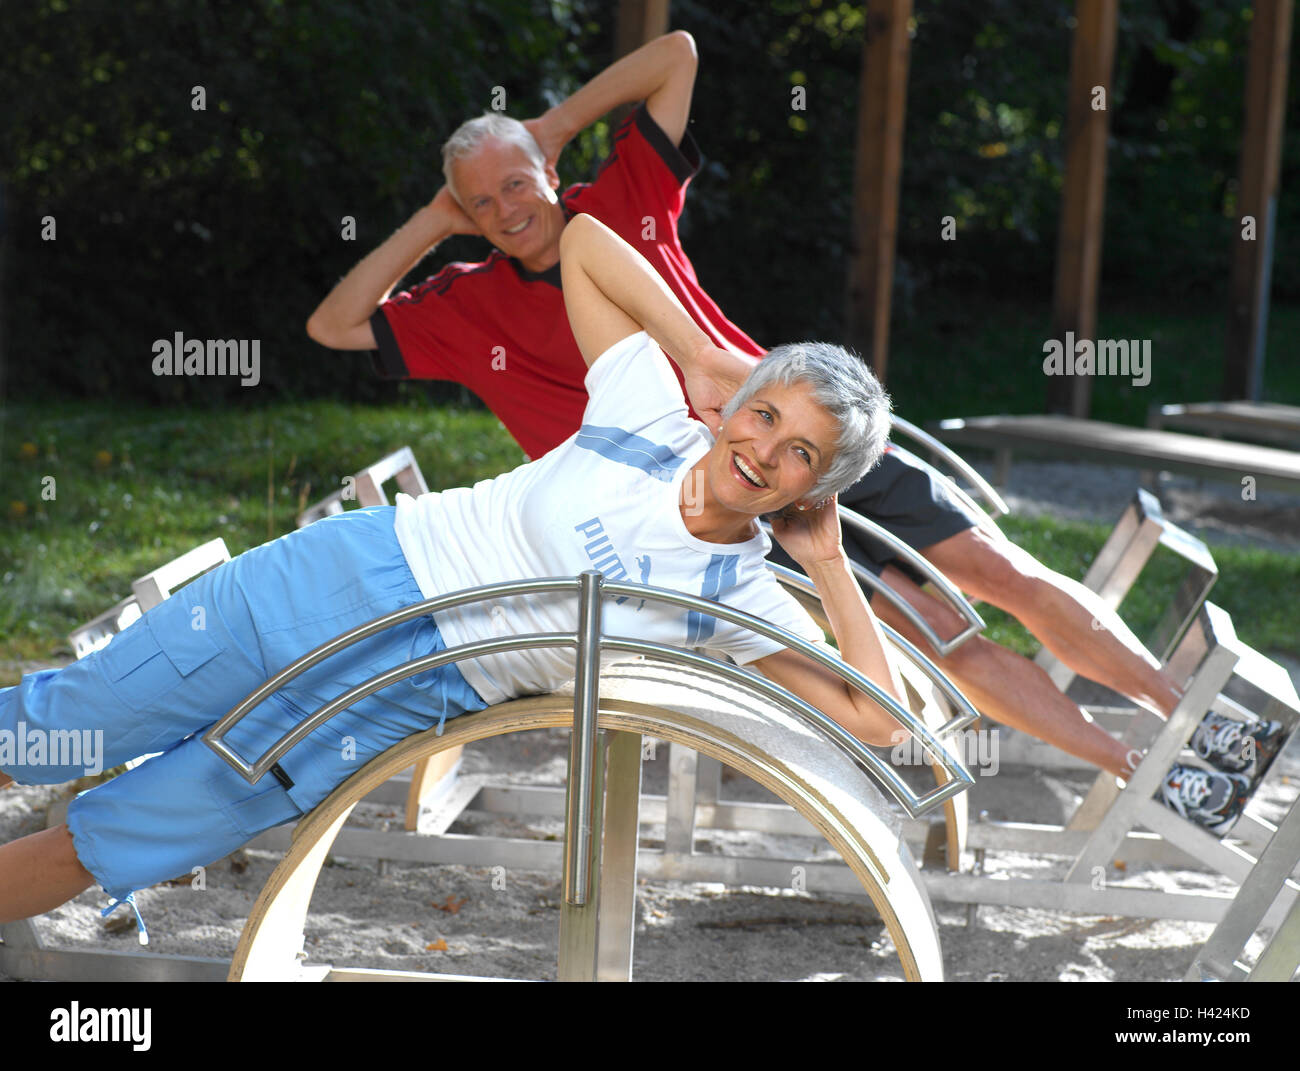 Trimm-dich-Pfad, senior citizens, training device, lie at the side, exercises, abdominal musculature 50-60 years, couple, sportily, sport, activity, gymnastics, gymnastics exercises, gymnastics practise, health, fitness, training, musculature, strengthening, stomach muscles, abdominal muscle training, rationalisation, consolidation, practise, laugh, happily, cheerfulness, together, leisure time, hobby, activity, edge of the forest Stock Photo